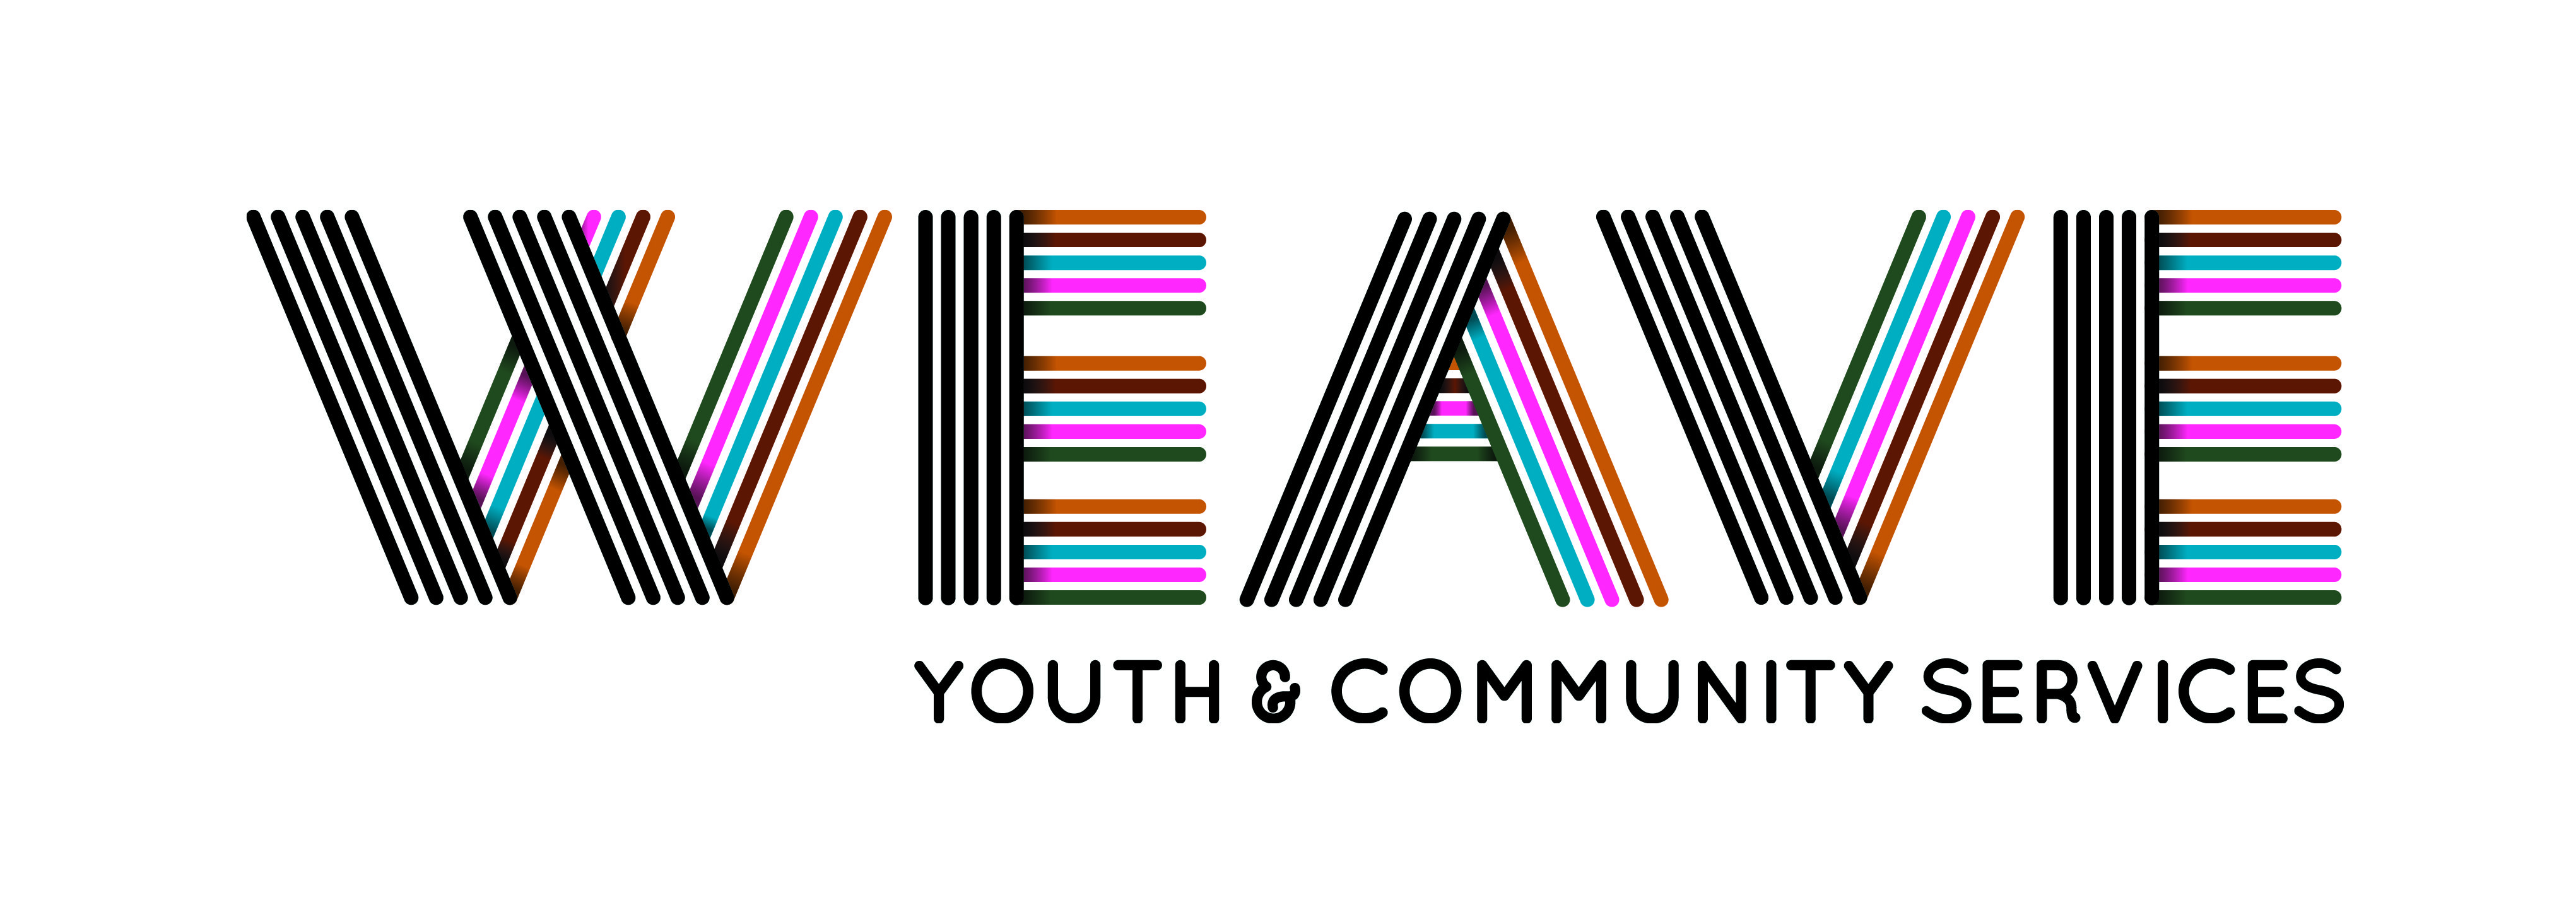 Weave Youth & Community Services